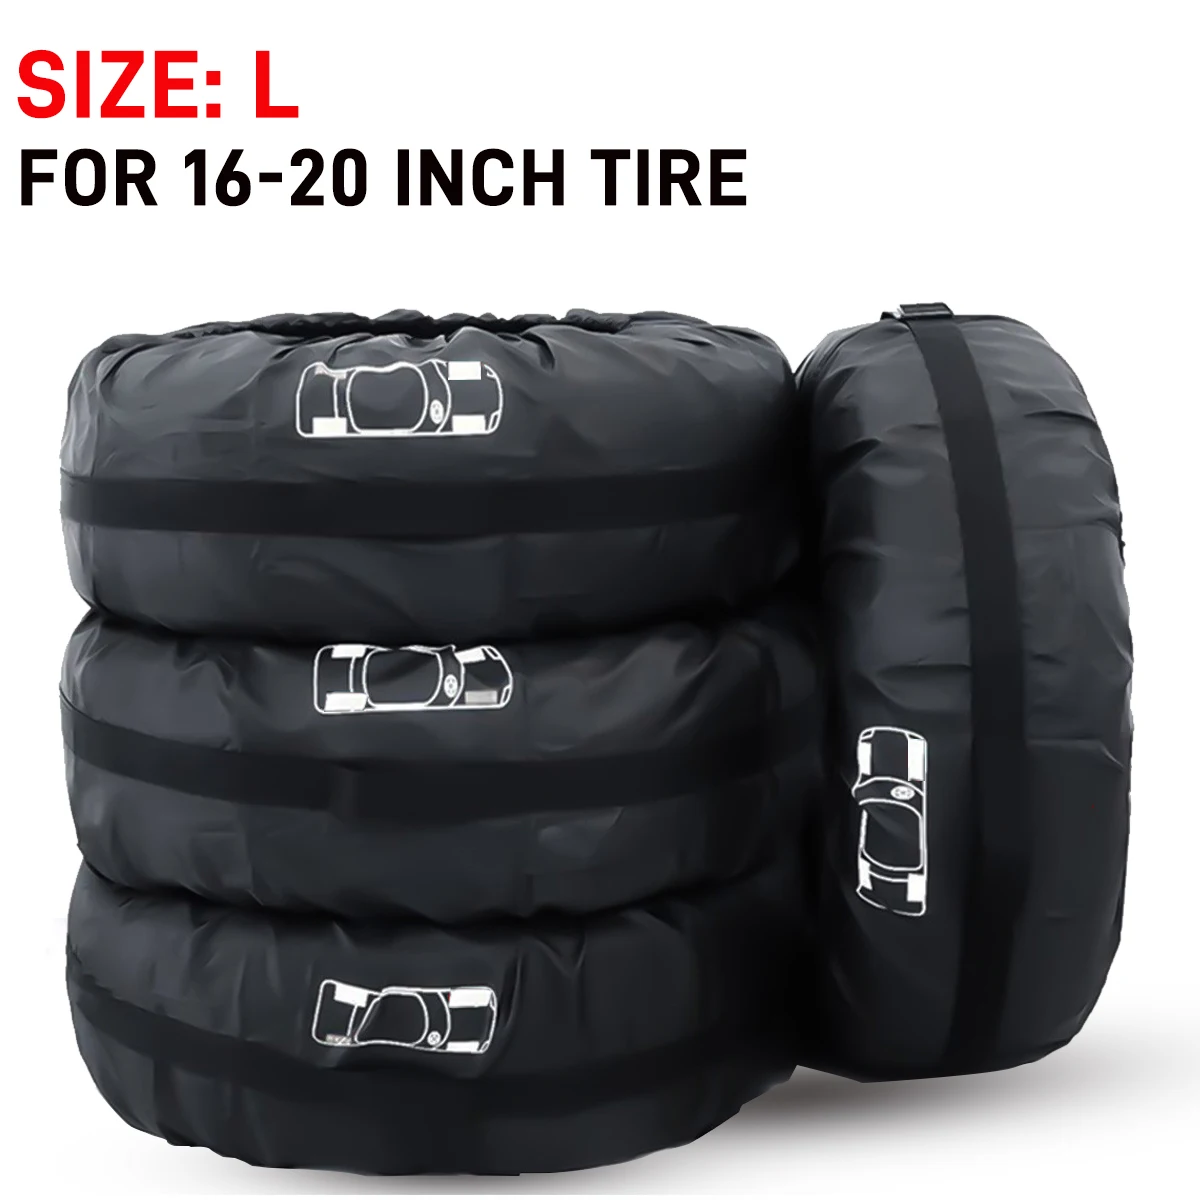 iTimo Dust-proof Car Spare Tyre Cover Universal Waterproof Silver Tire Storage Bag Car-Styling Tire Protector L 